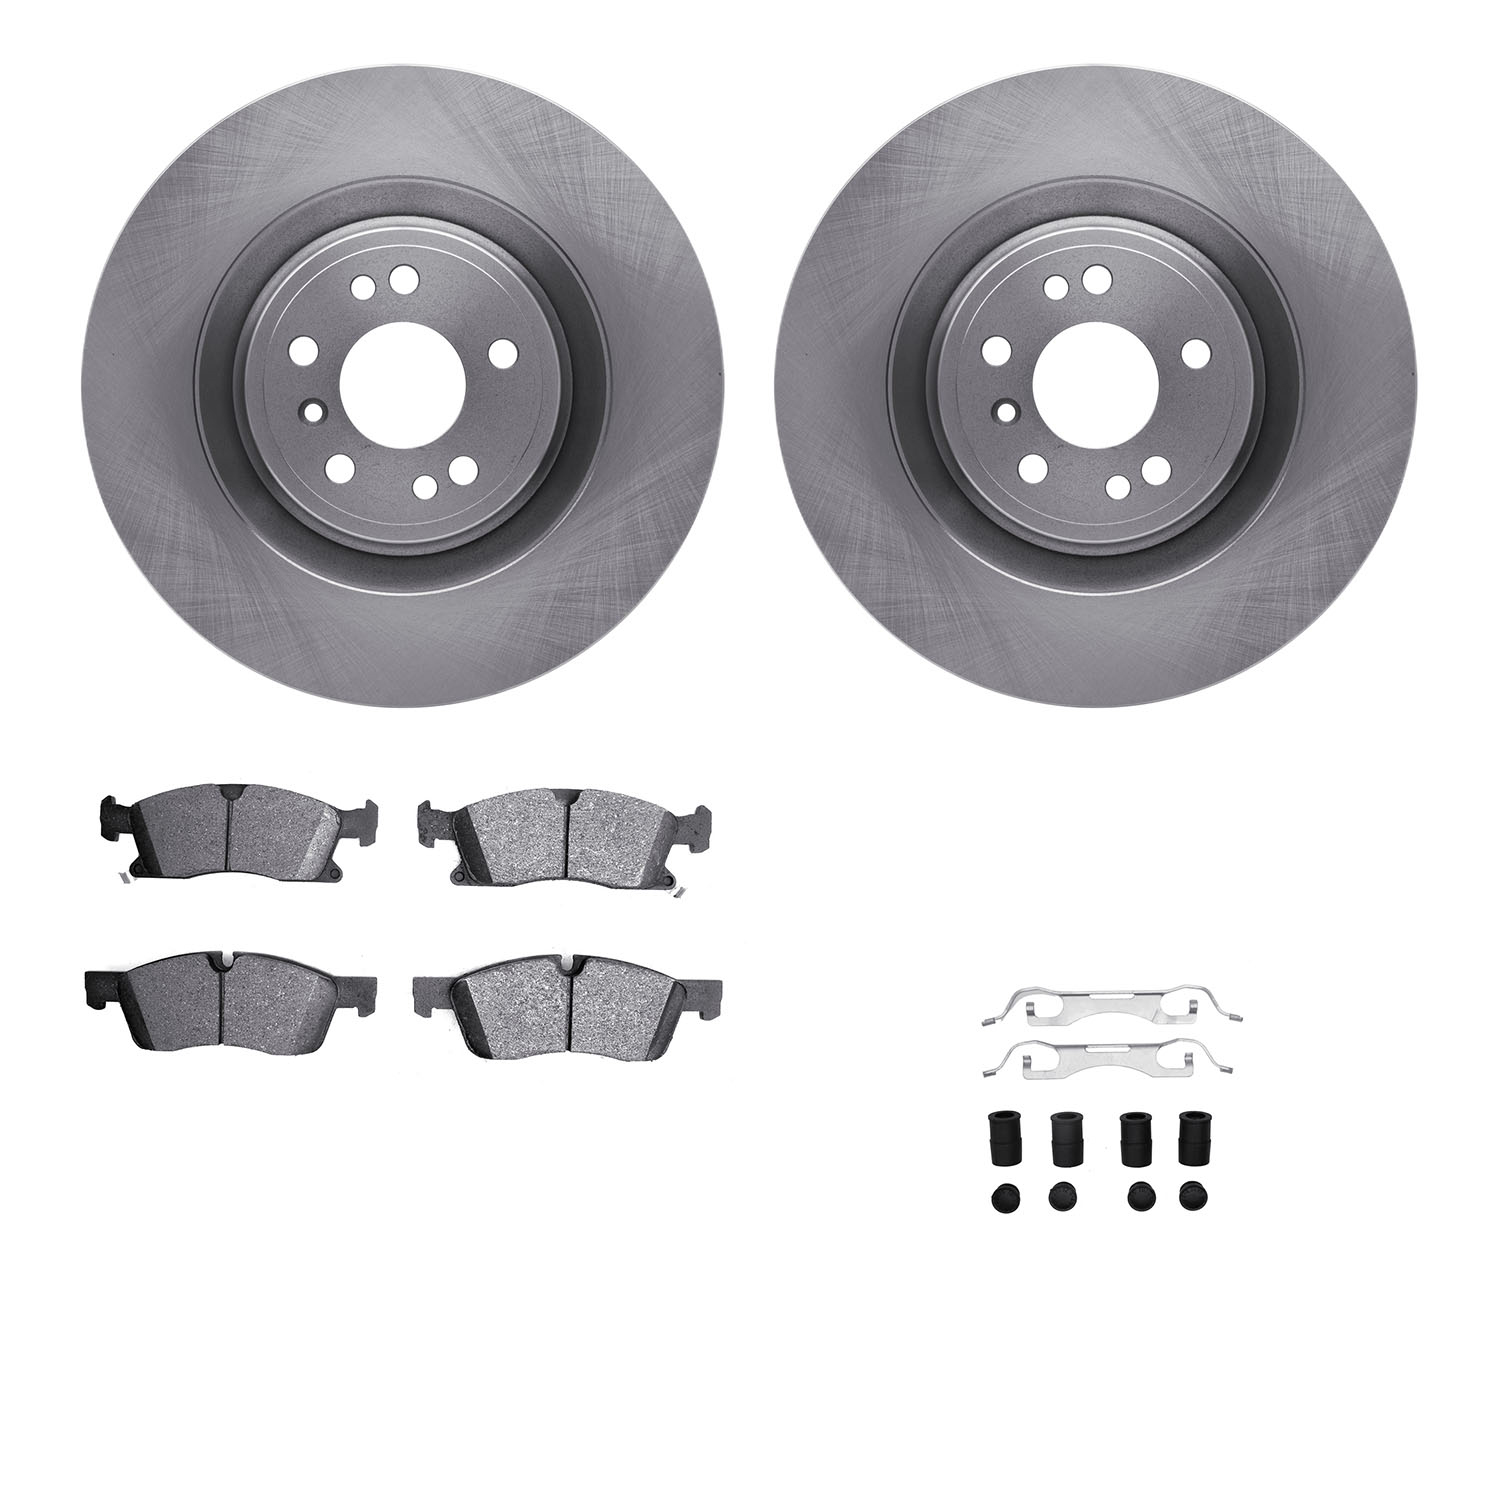 6412-63004 Brake Rotors with Ultimate-Duty Brake Pads Kit & Hardware, 2013-2019 Mercedes-Benz, Position: Front